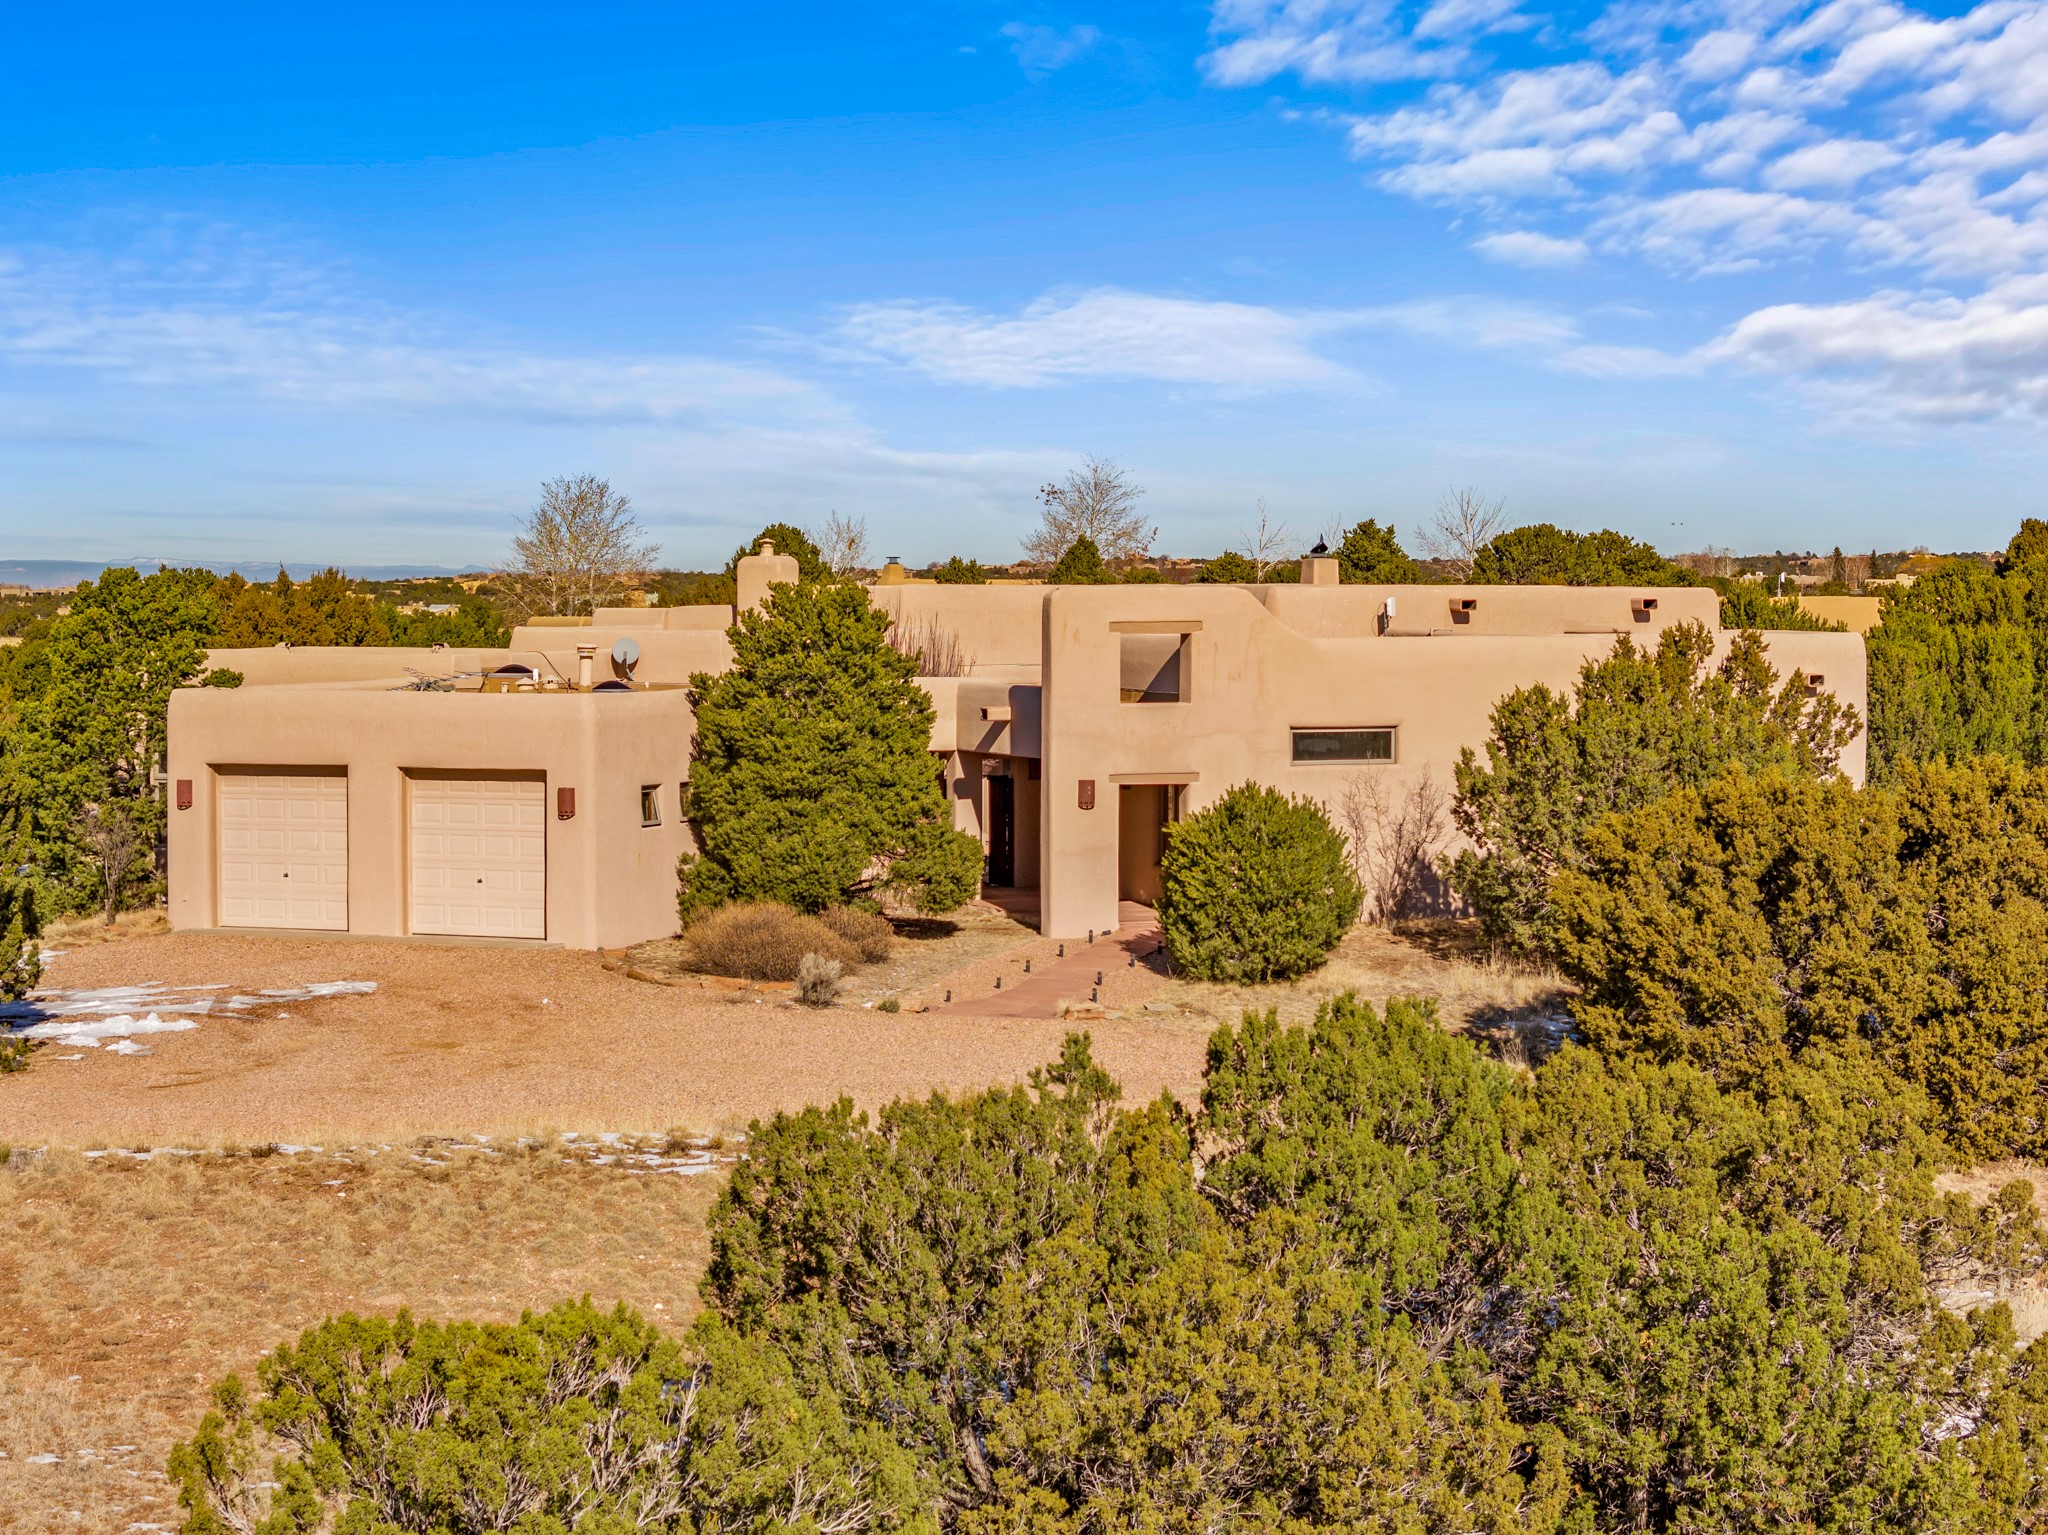 10 E Sand Sage, Santa Fe, New Mexico 87506, 3 Bedrooms Bedrooms, ,4 BathroomsBathrooms,Residential,For Sale,10 E Sand Sage,202342020